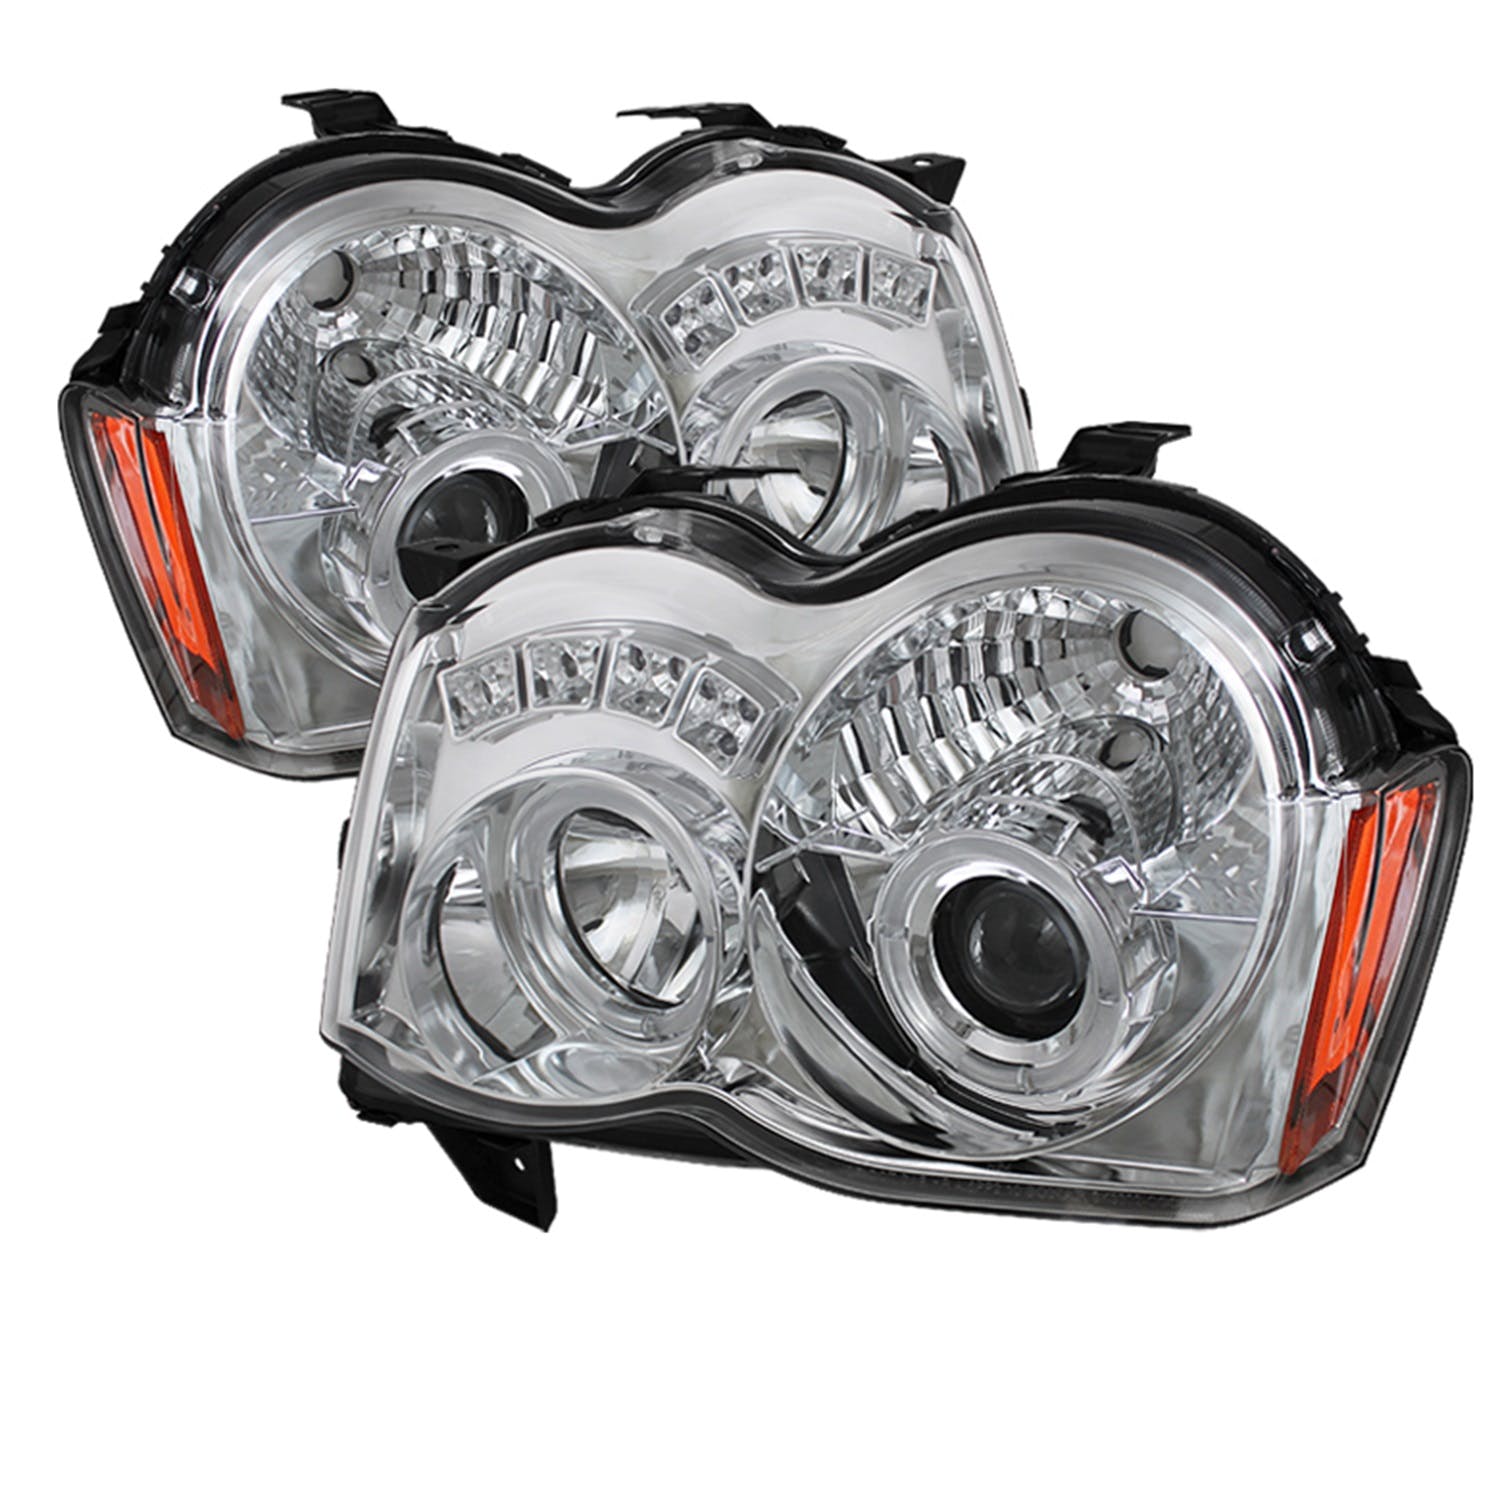 Spyder Auto 5070159 ( SPYDER ) JEEP GRAND CHEROKEE 08-10 PROJECTOR HEADLIGHTS-LED HALO-LED ( REPLACE